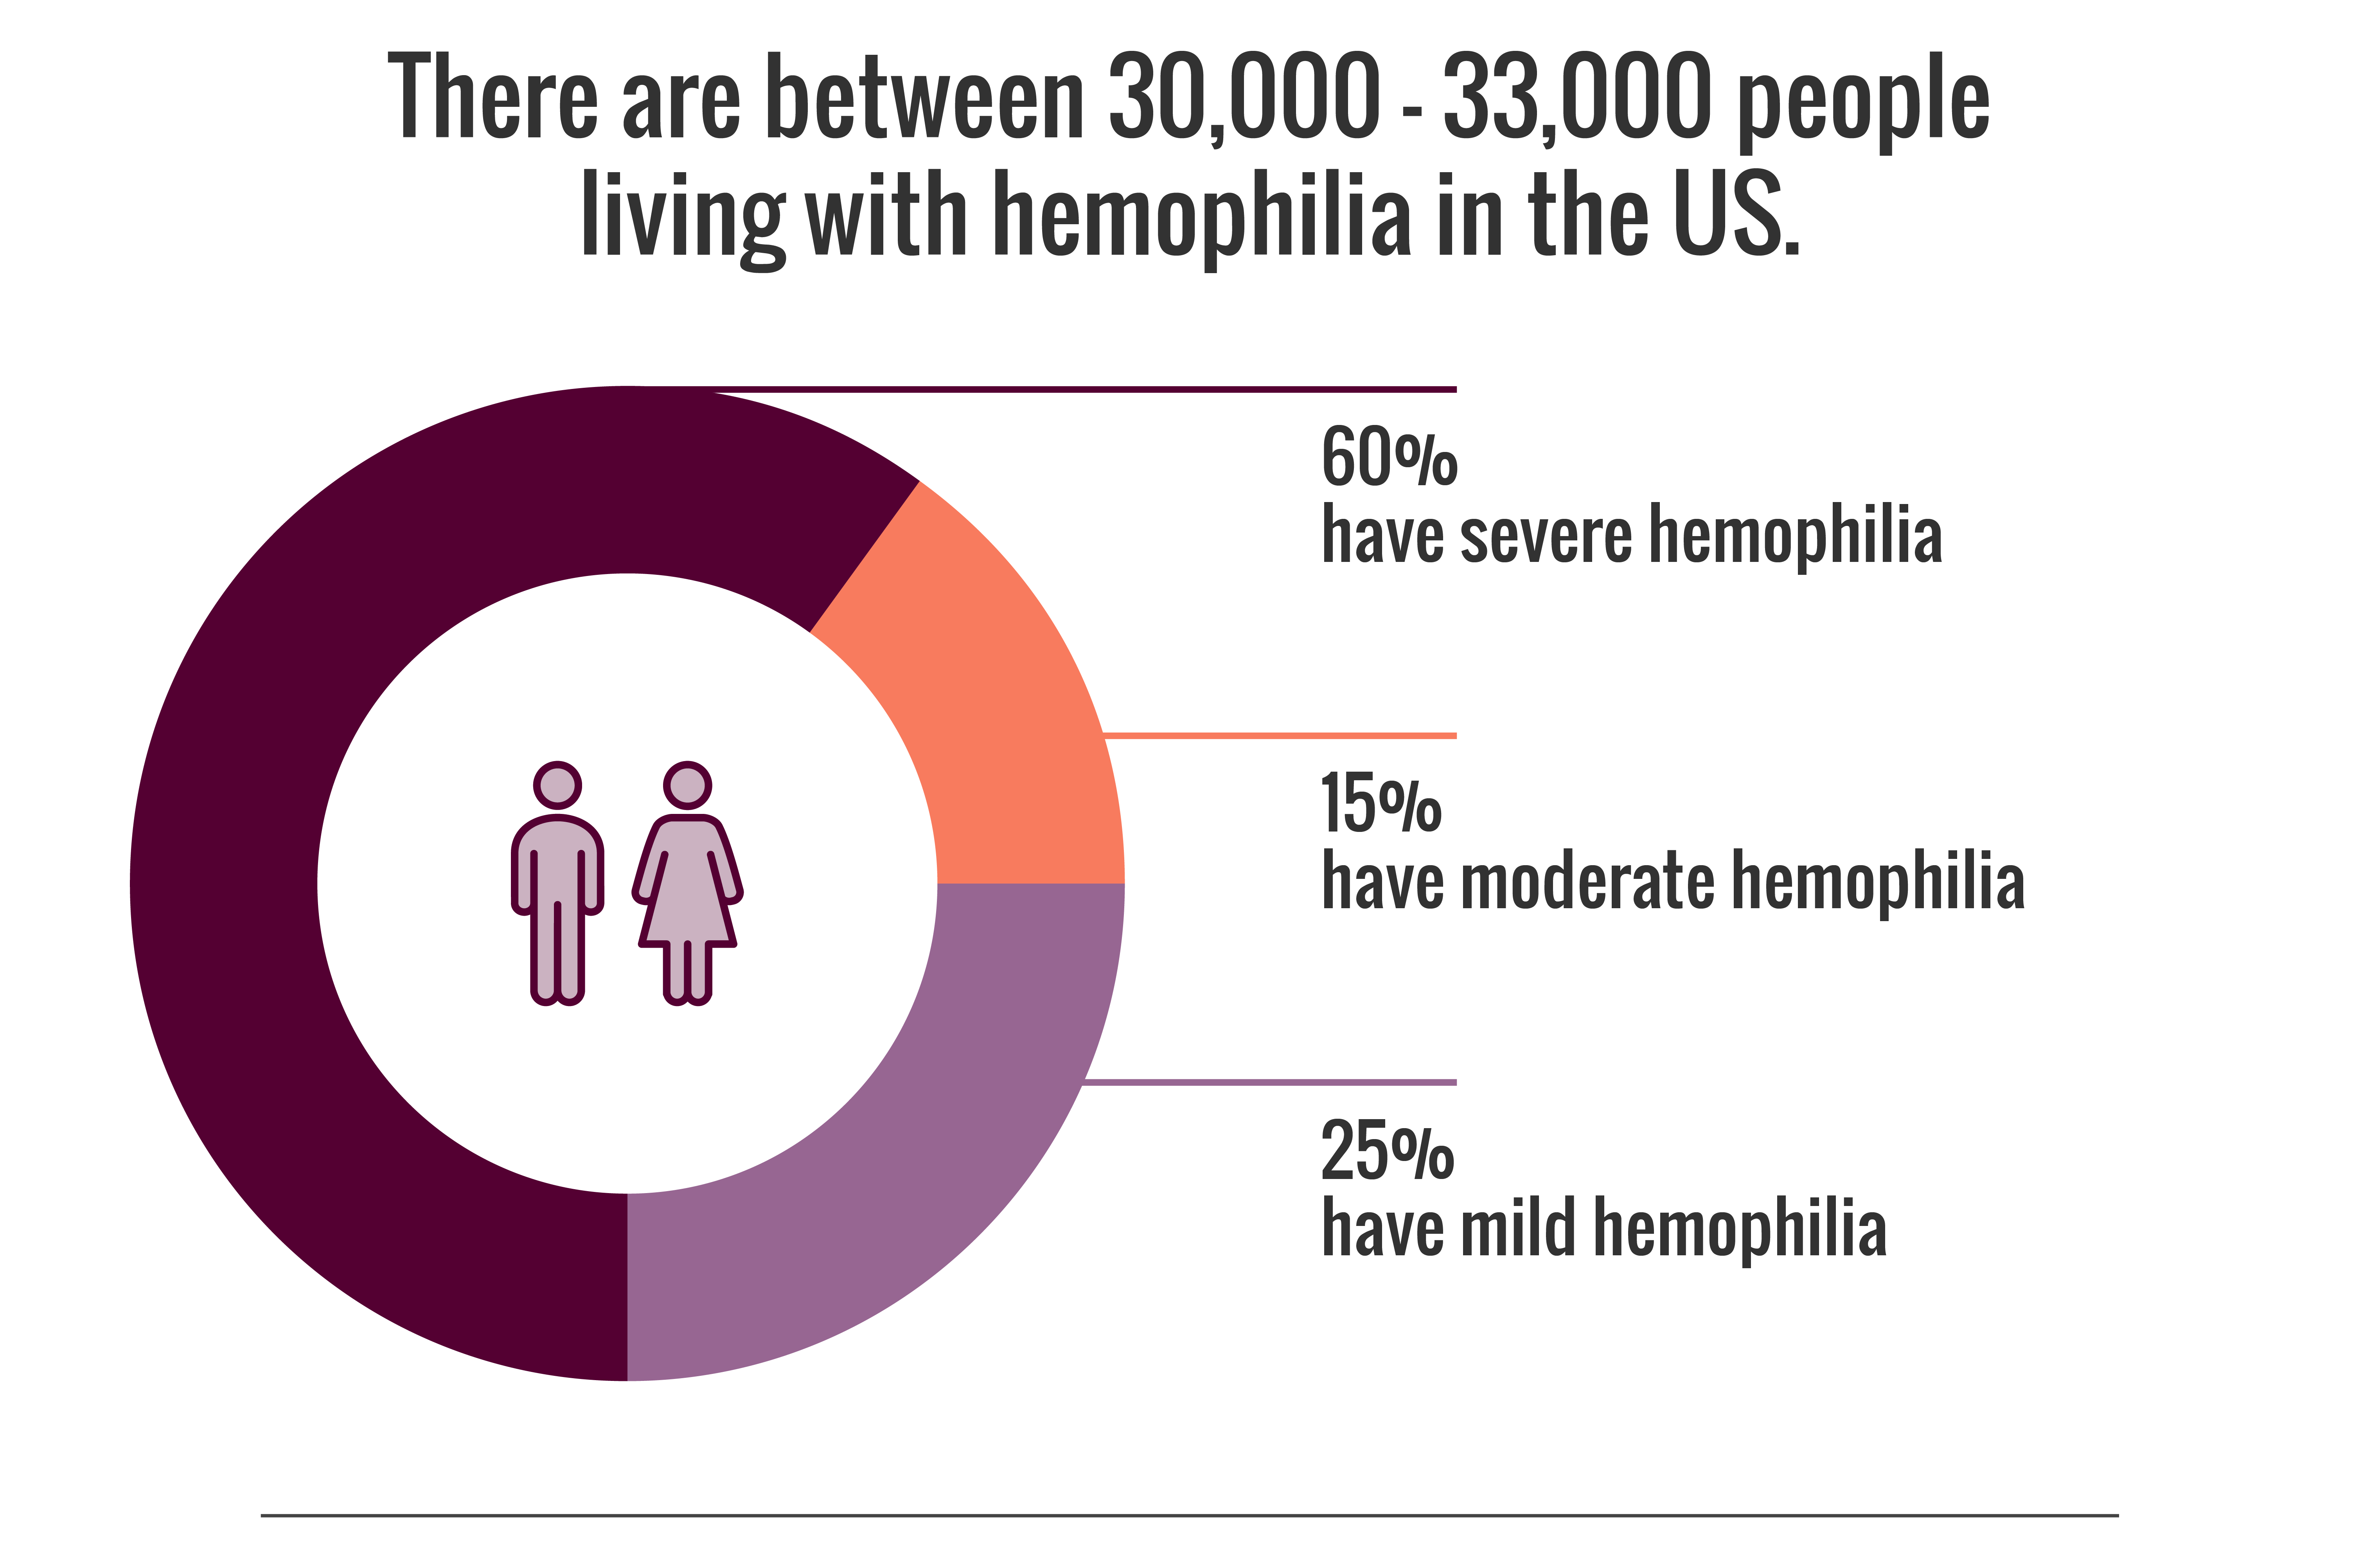 Fast Facts 2 - Circle graph with man and woman icon referencing number of people with hemophilia in the U.S